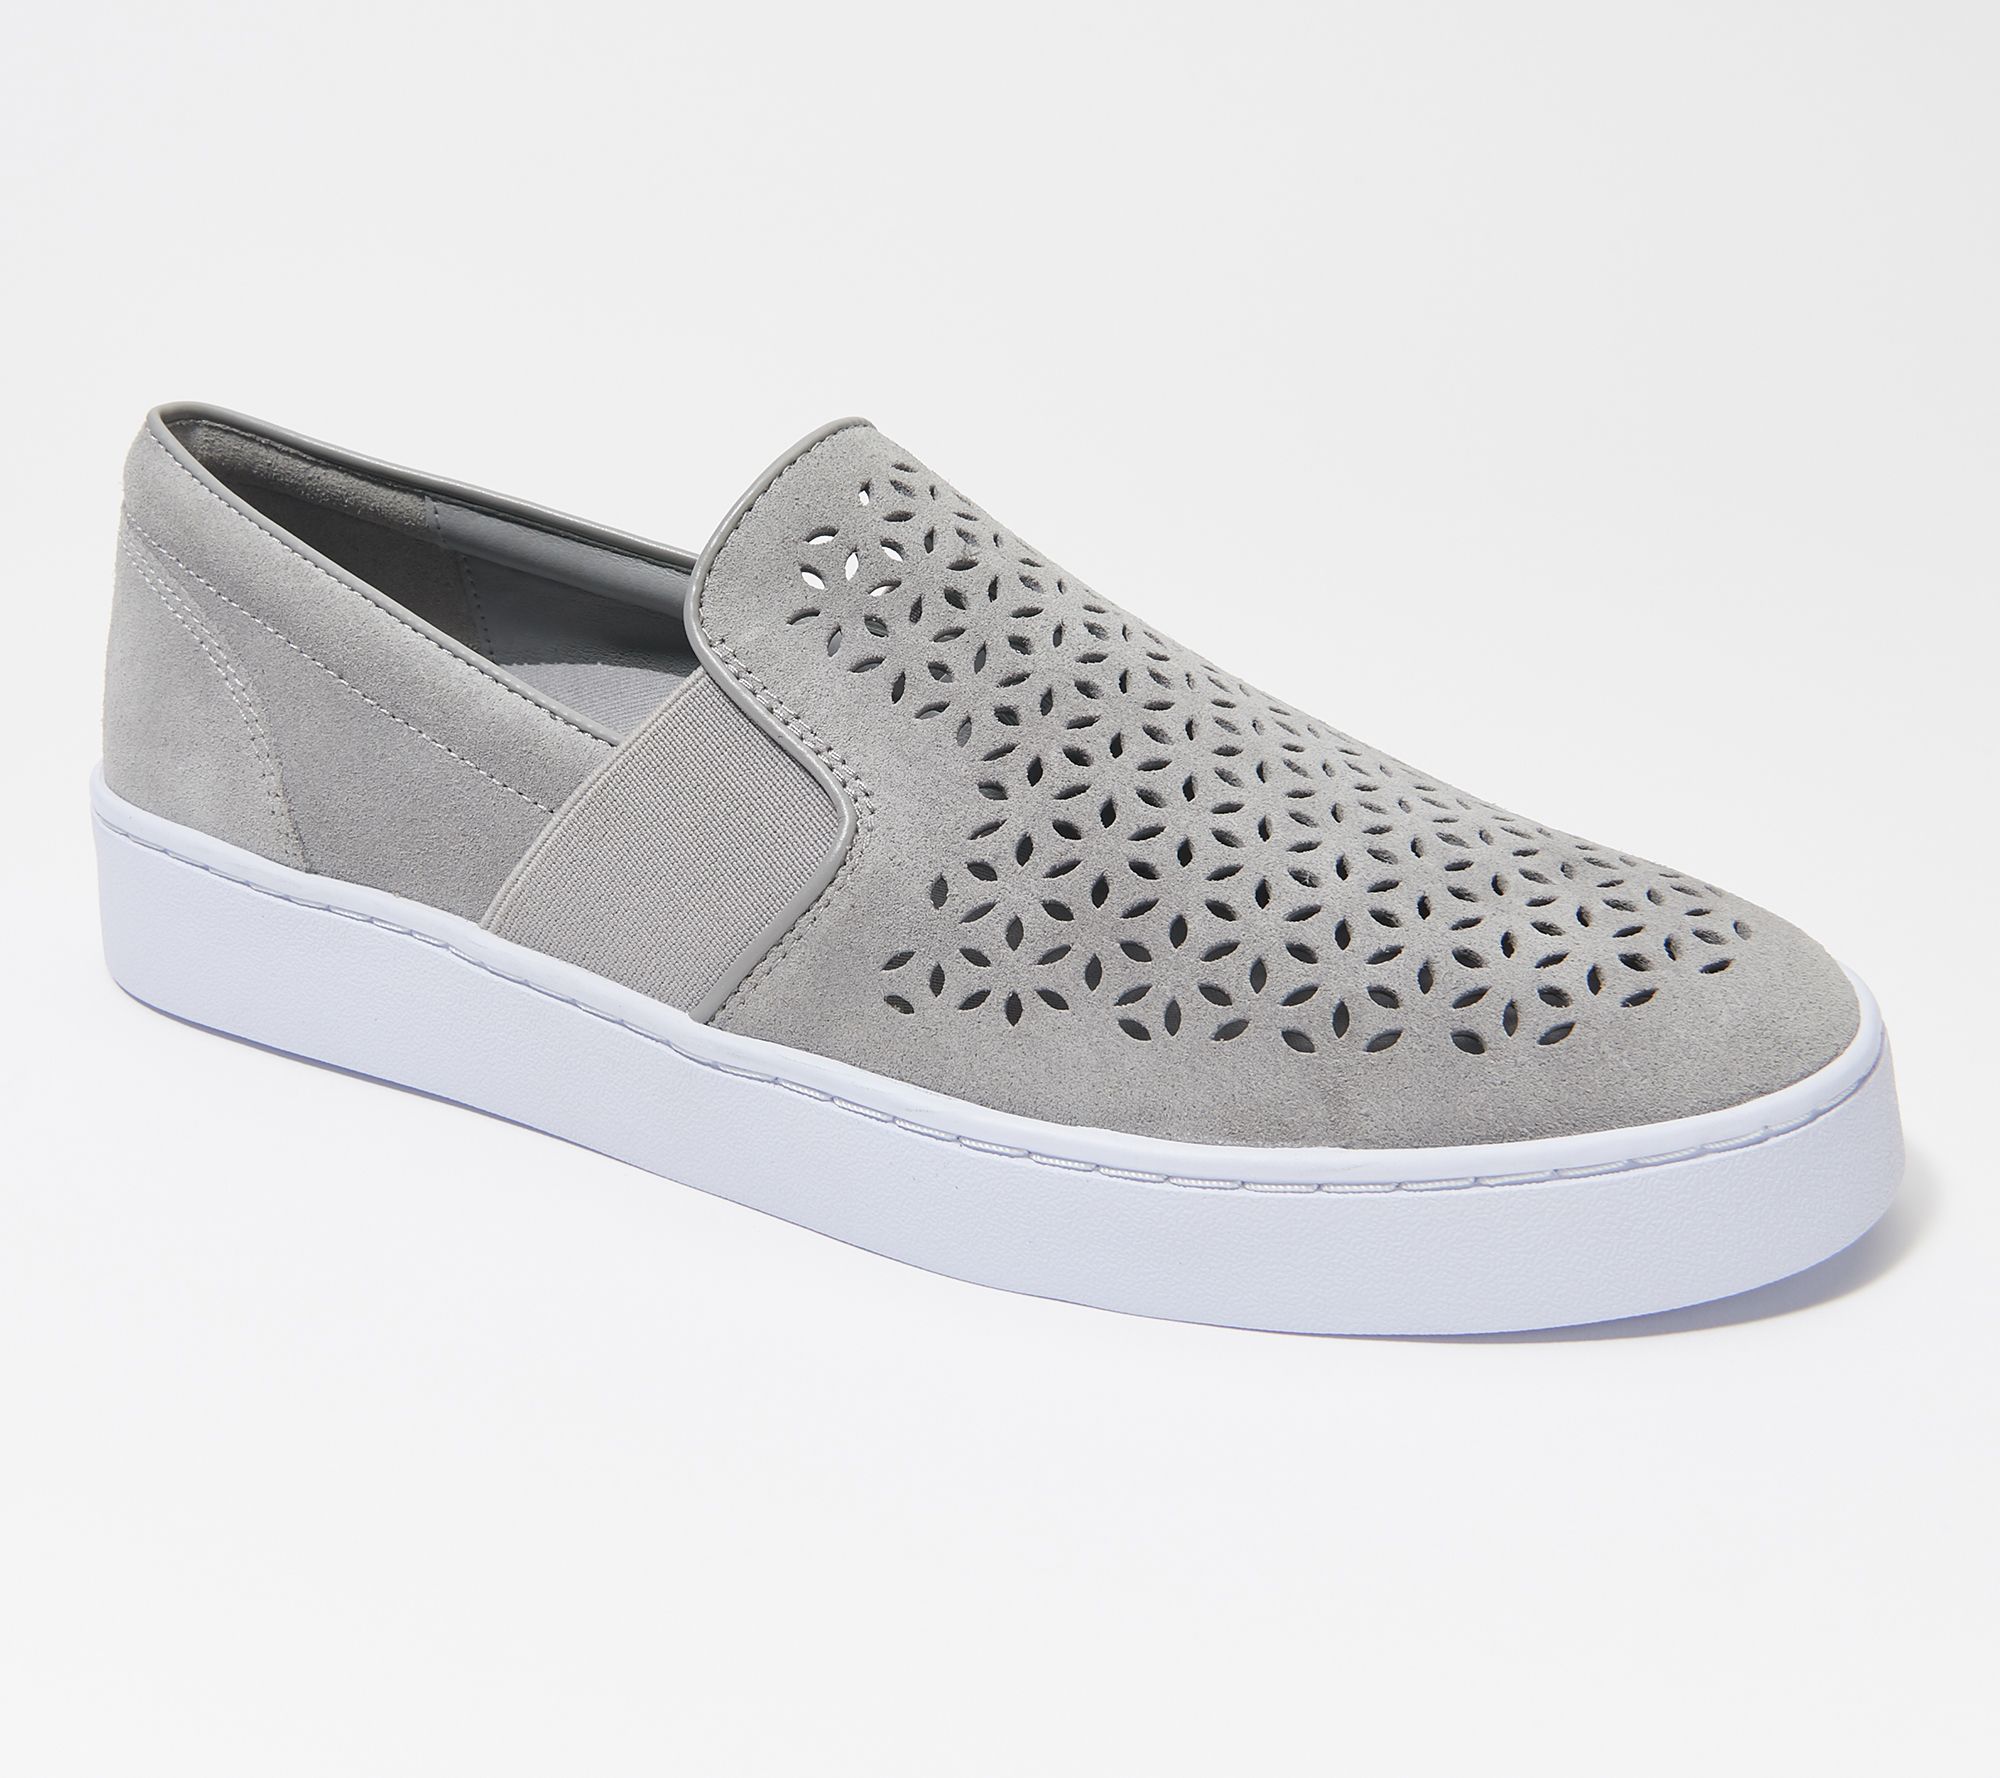 vionic perforated slip on sneaker